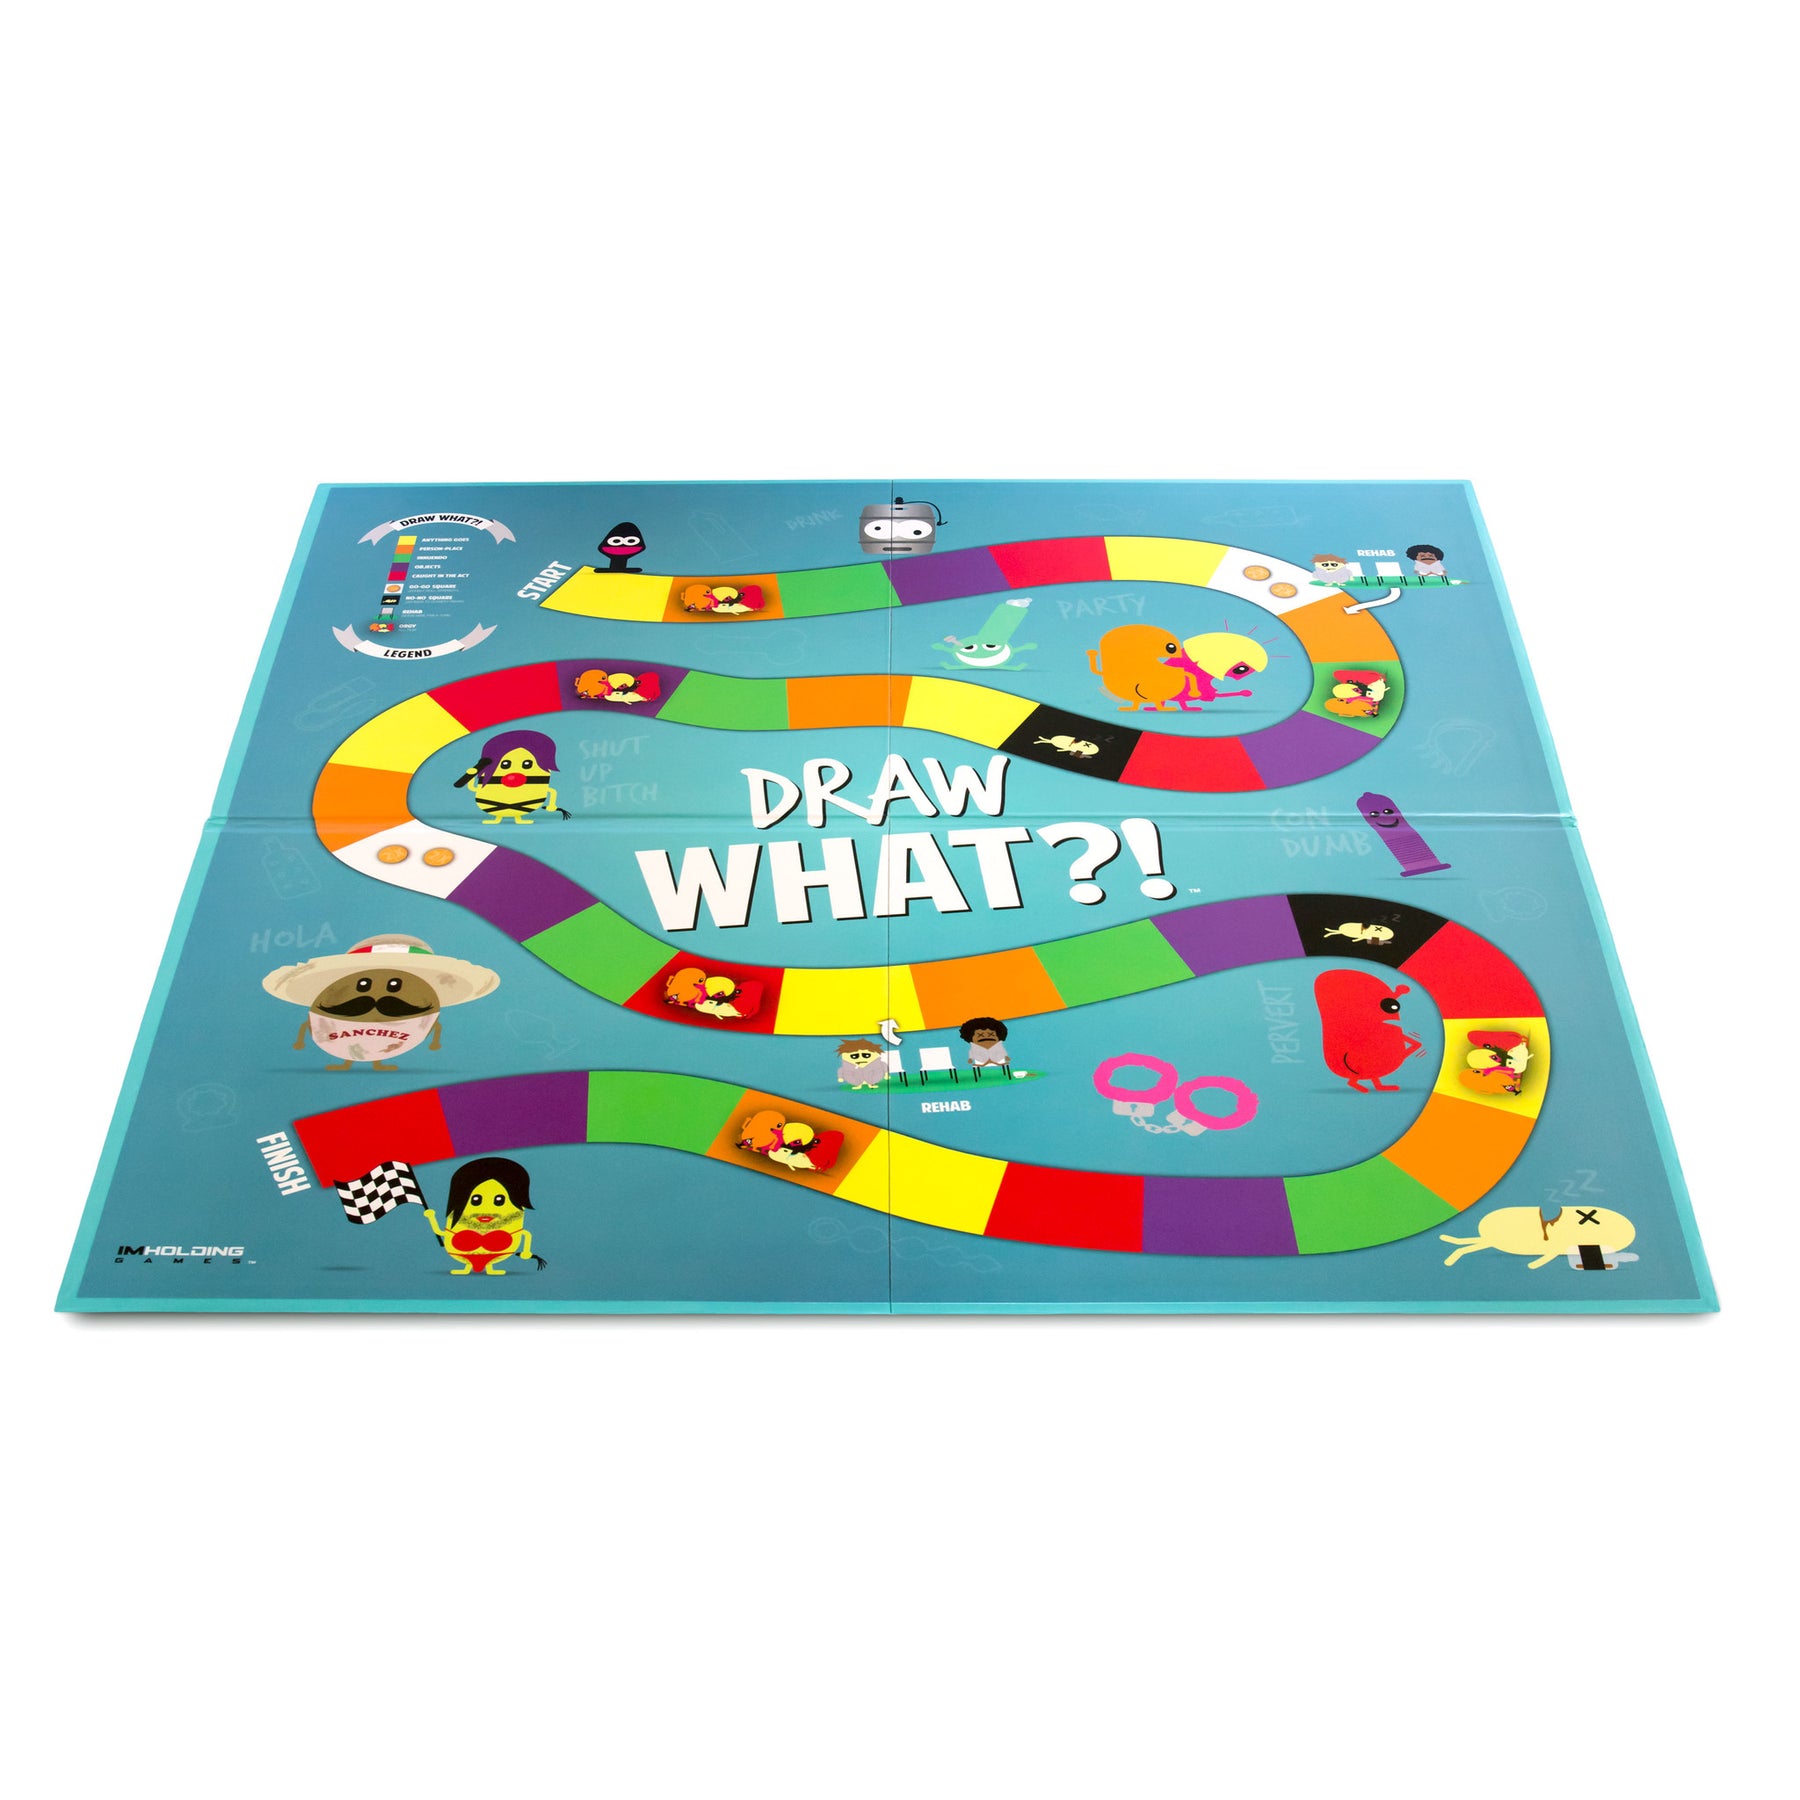 Draw What?! Board Game Hilarious Party Game For Adults Imholding Games